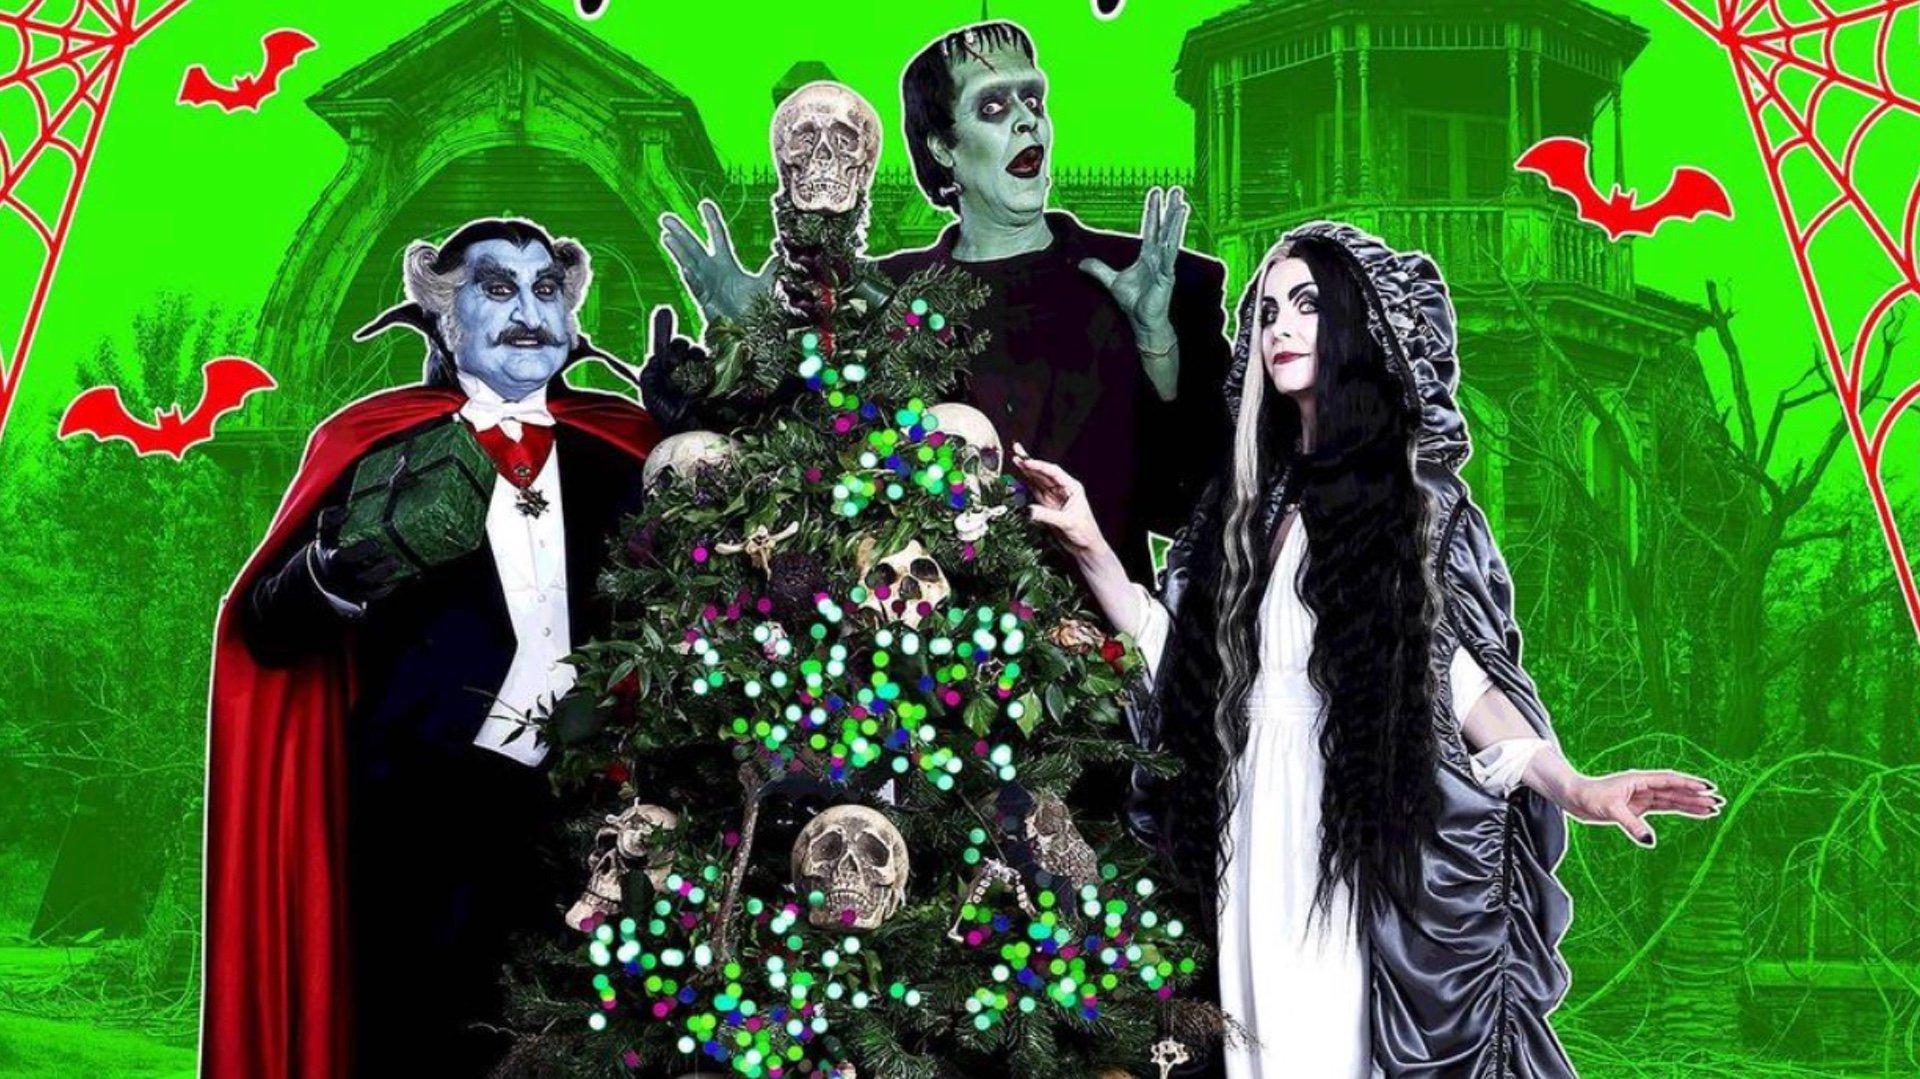 Rob Zombie Shares A Christmas Photo For The Munsters Featuring